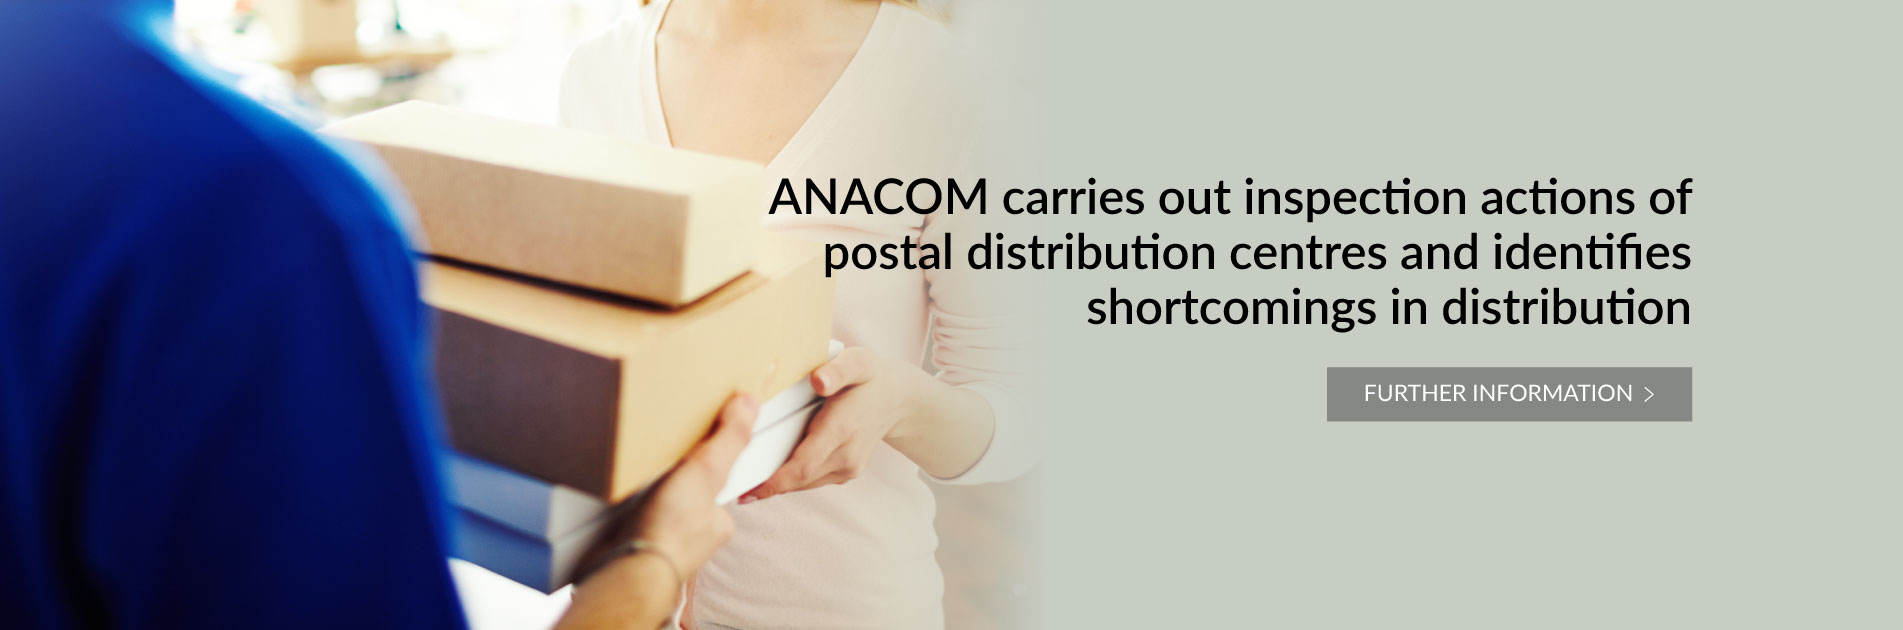 ANACOM carries out inspection actions of postal distribution